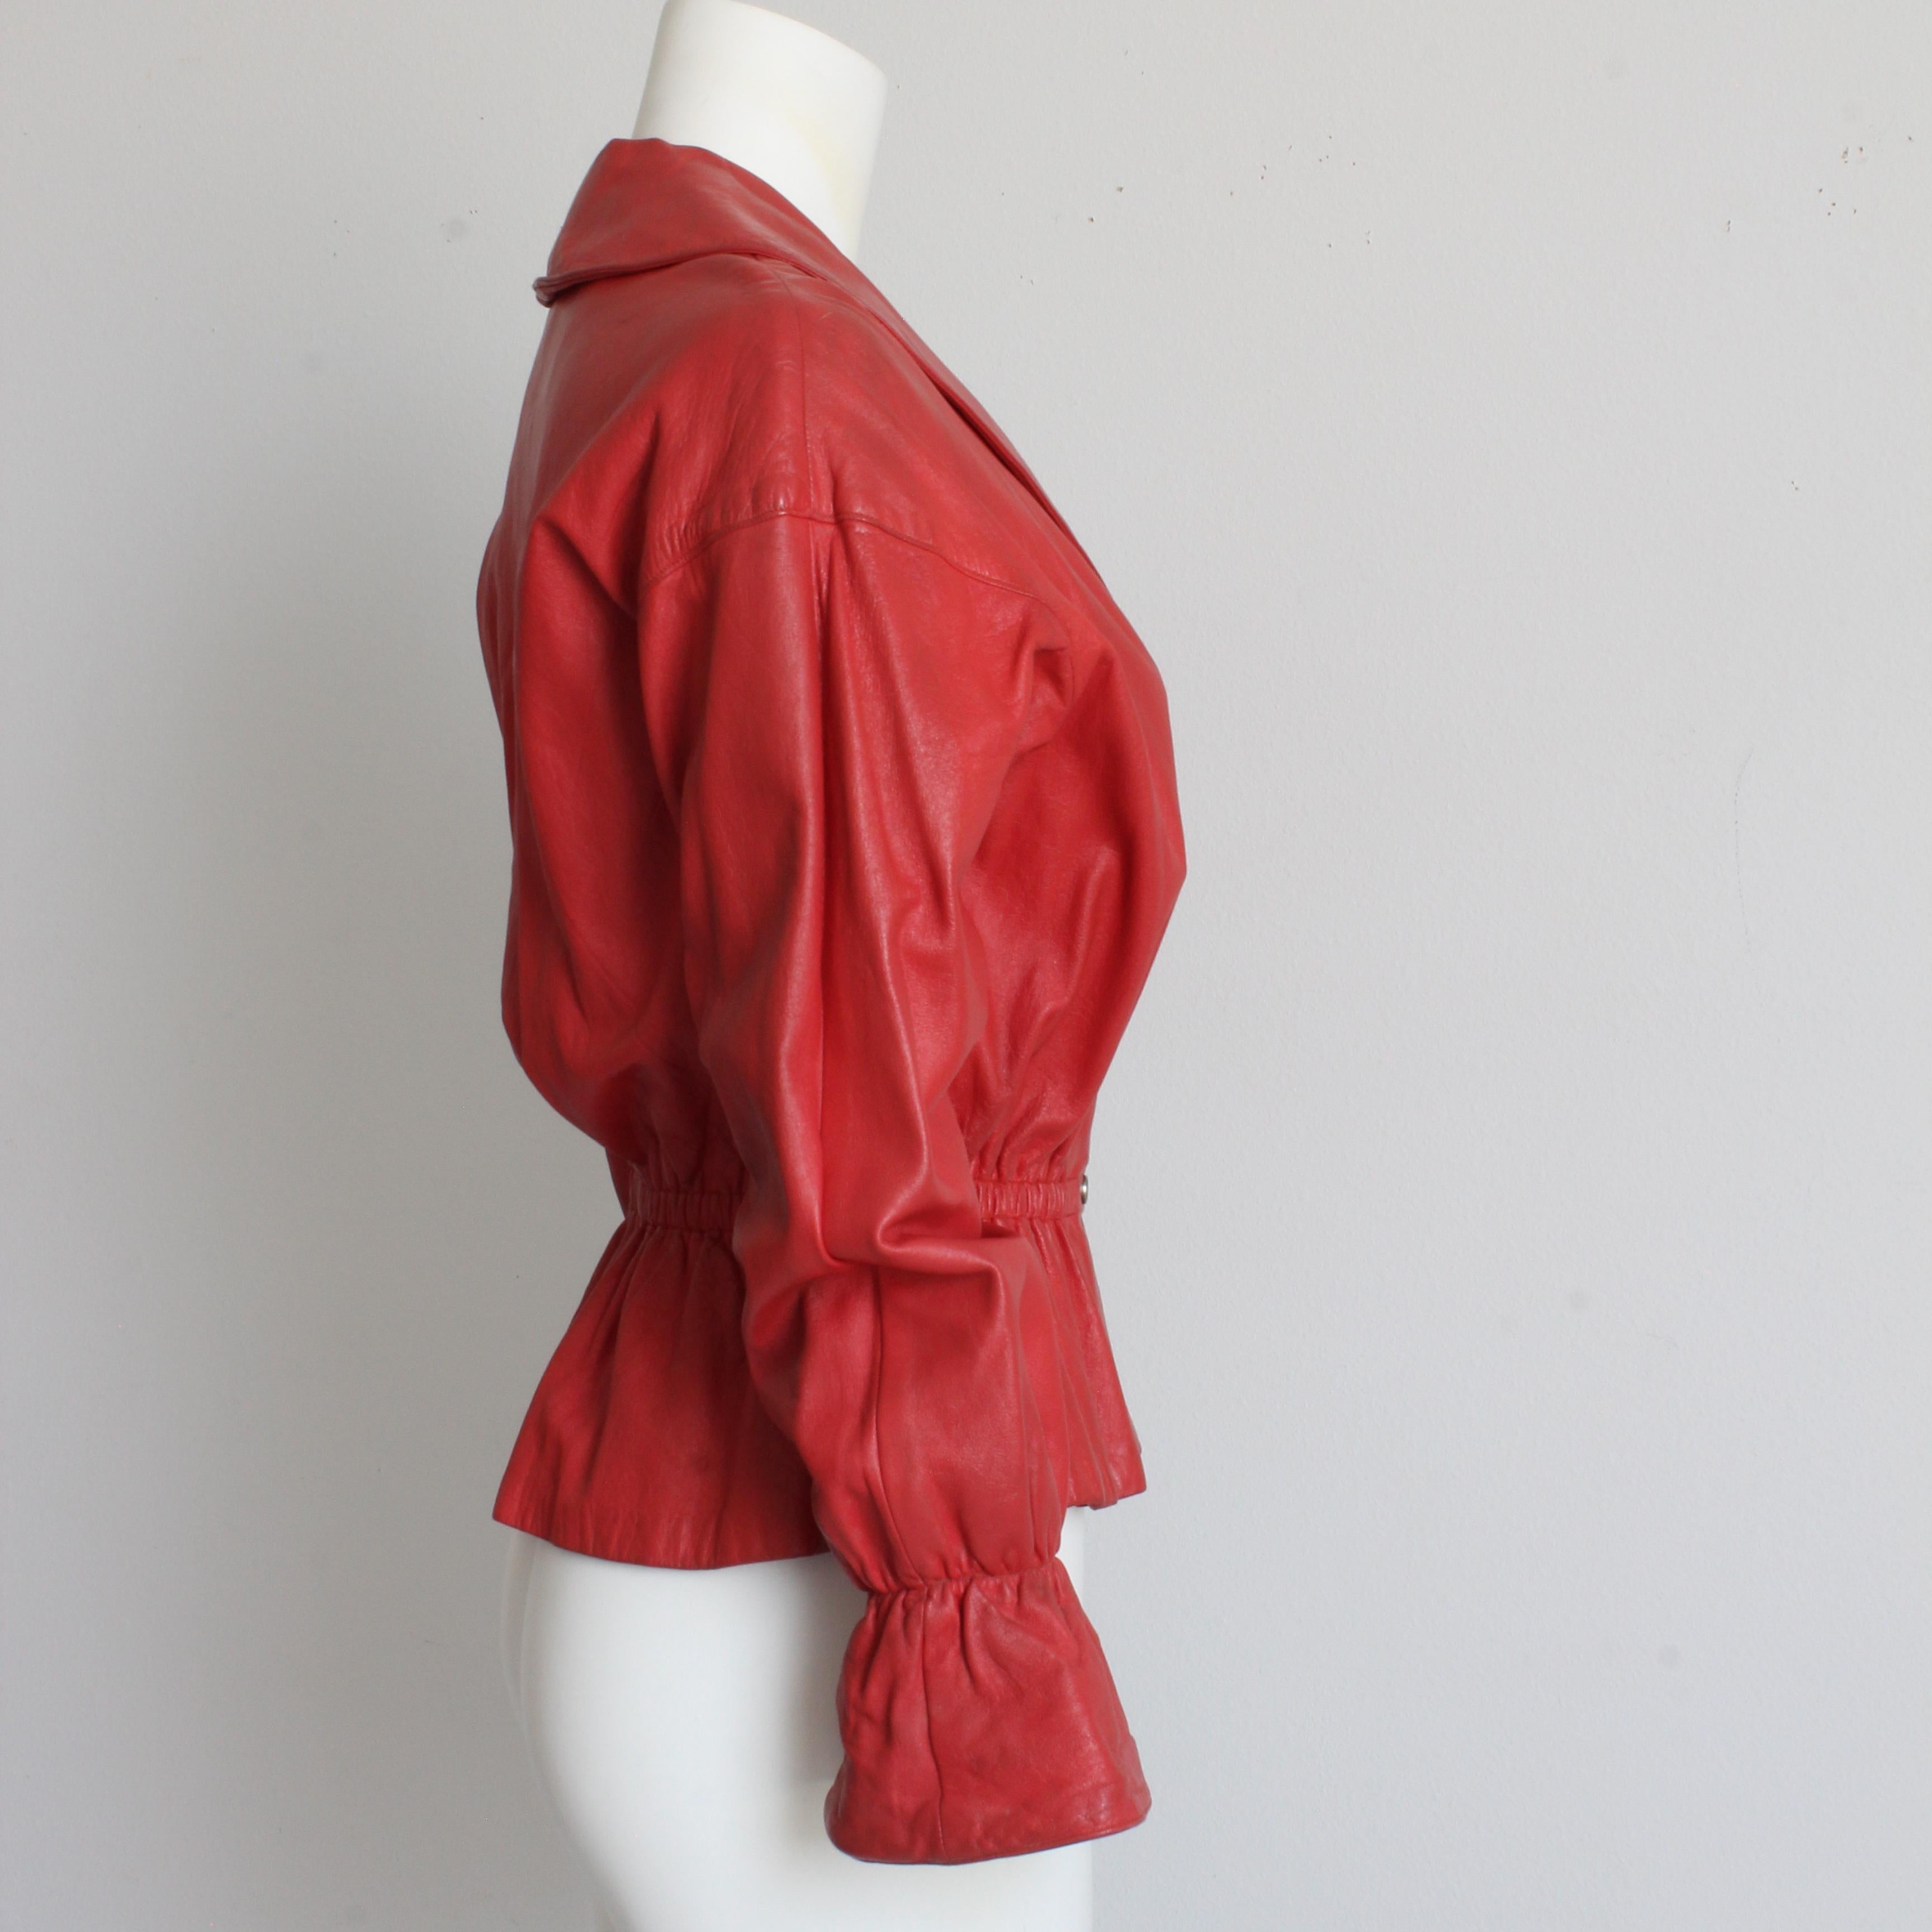 Women's or Men's Bonnie Cashin for Sills Red Leather Jacket with Peplum Waist Rare Vintage 1960s  For Sale